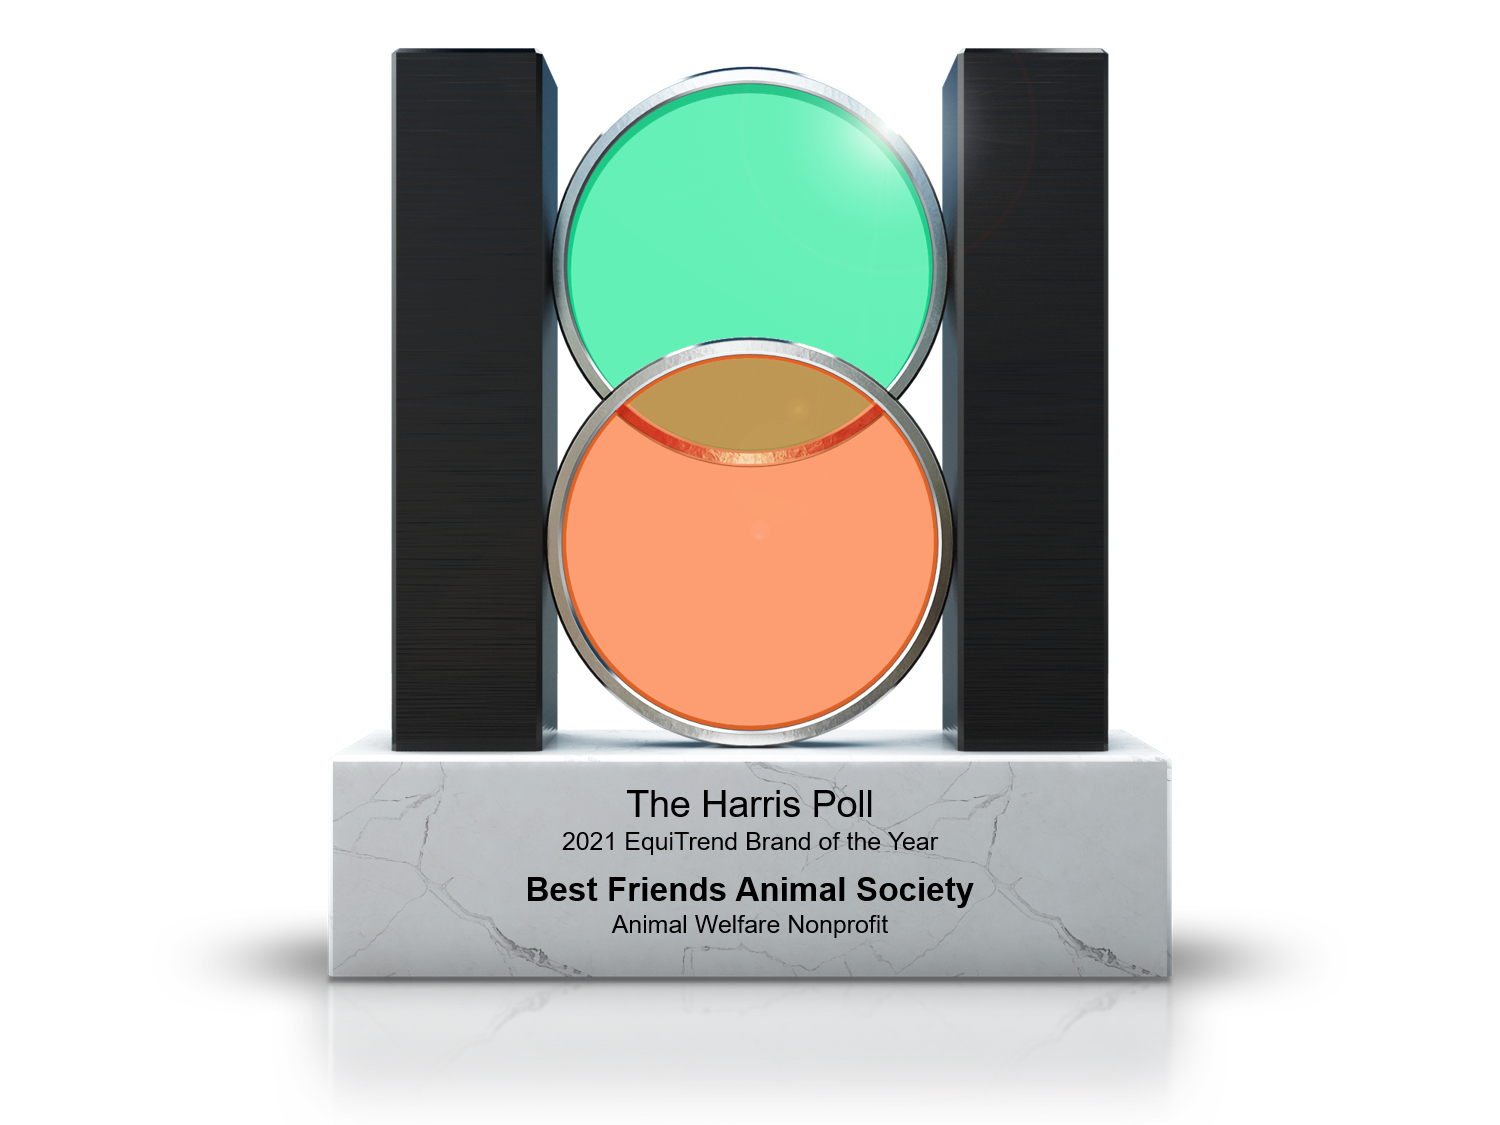 Best Friends Animal Society has been named a Brand of the Year* in the 2021 Harris Poll EquiTrend® study.